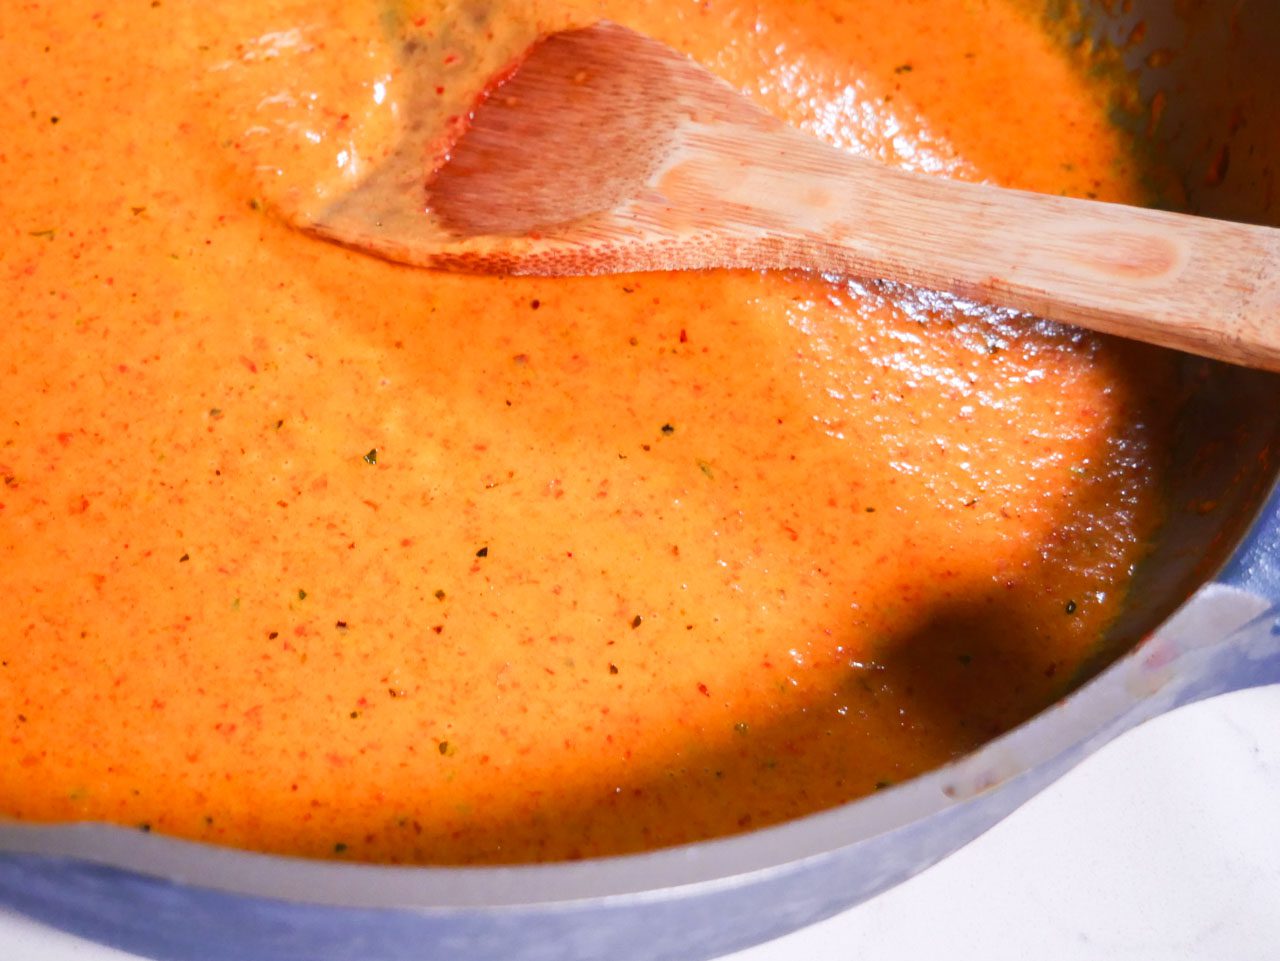 Roasted red pepper bisque cooking in pan with wooden spoon